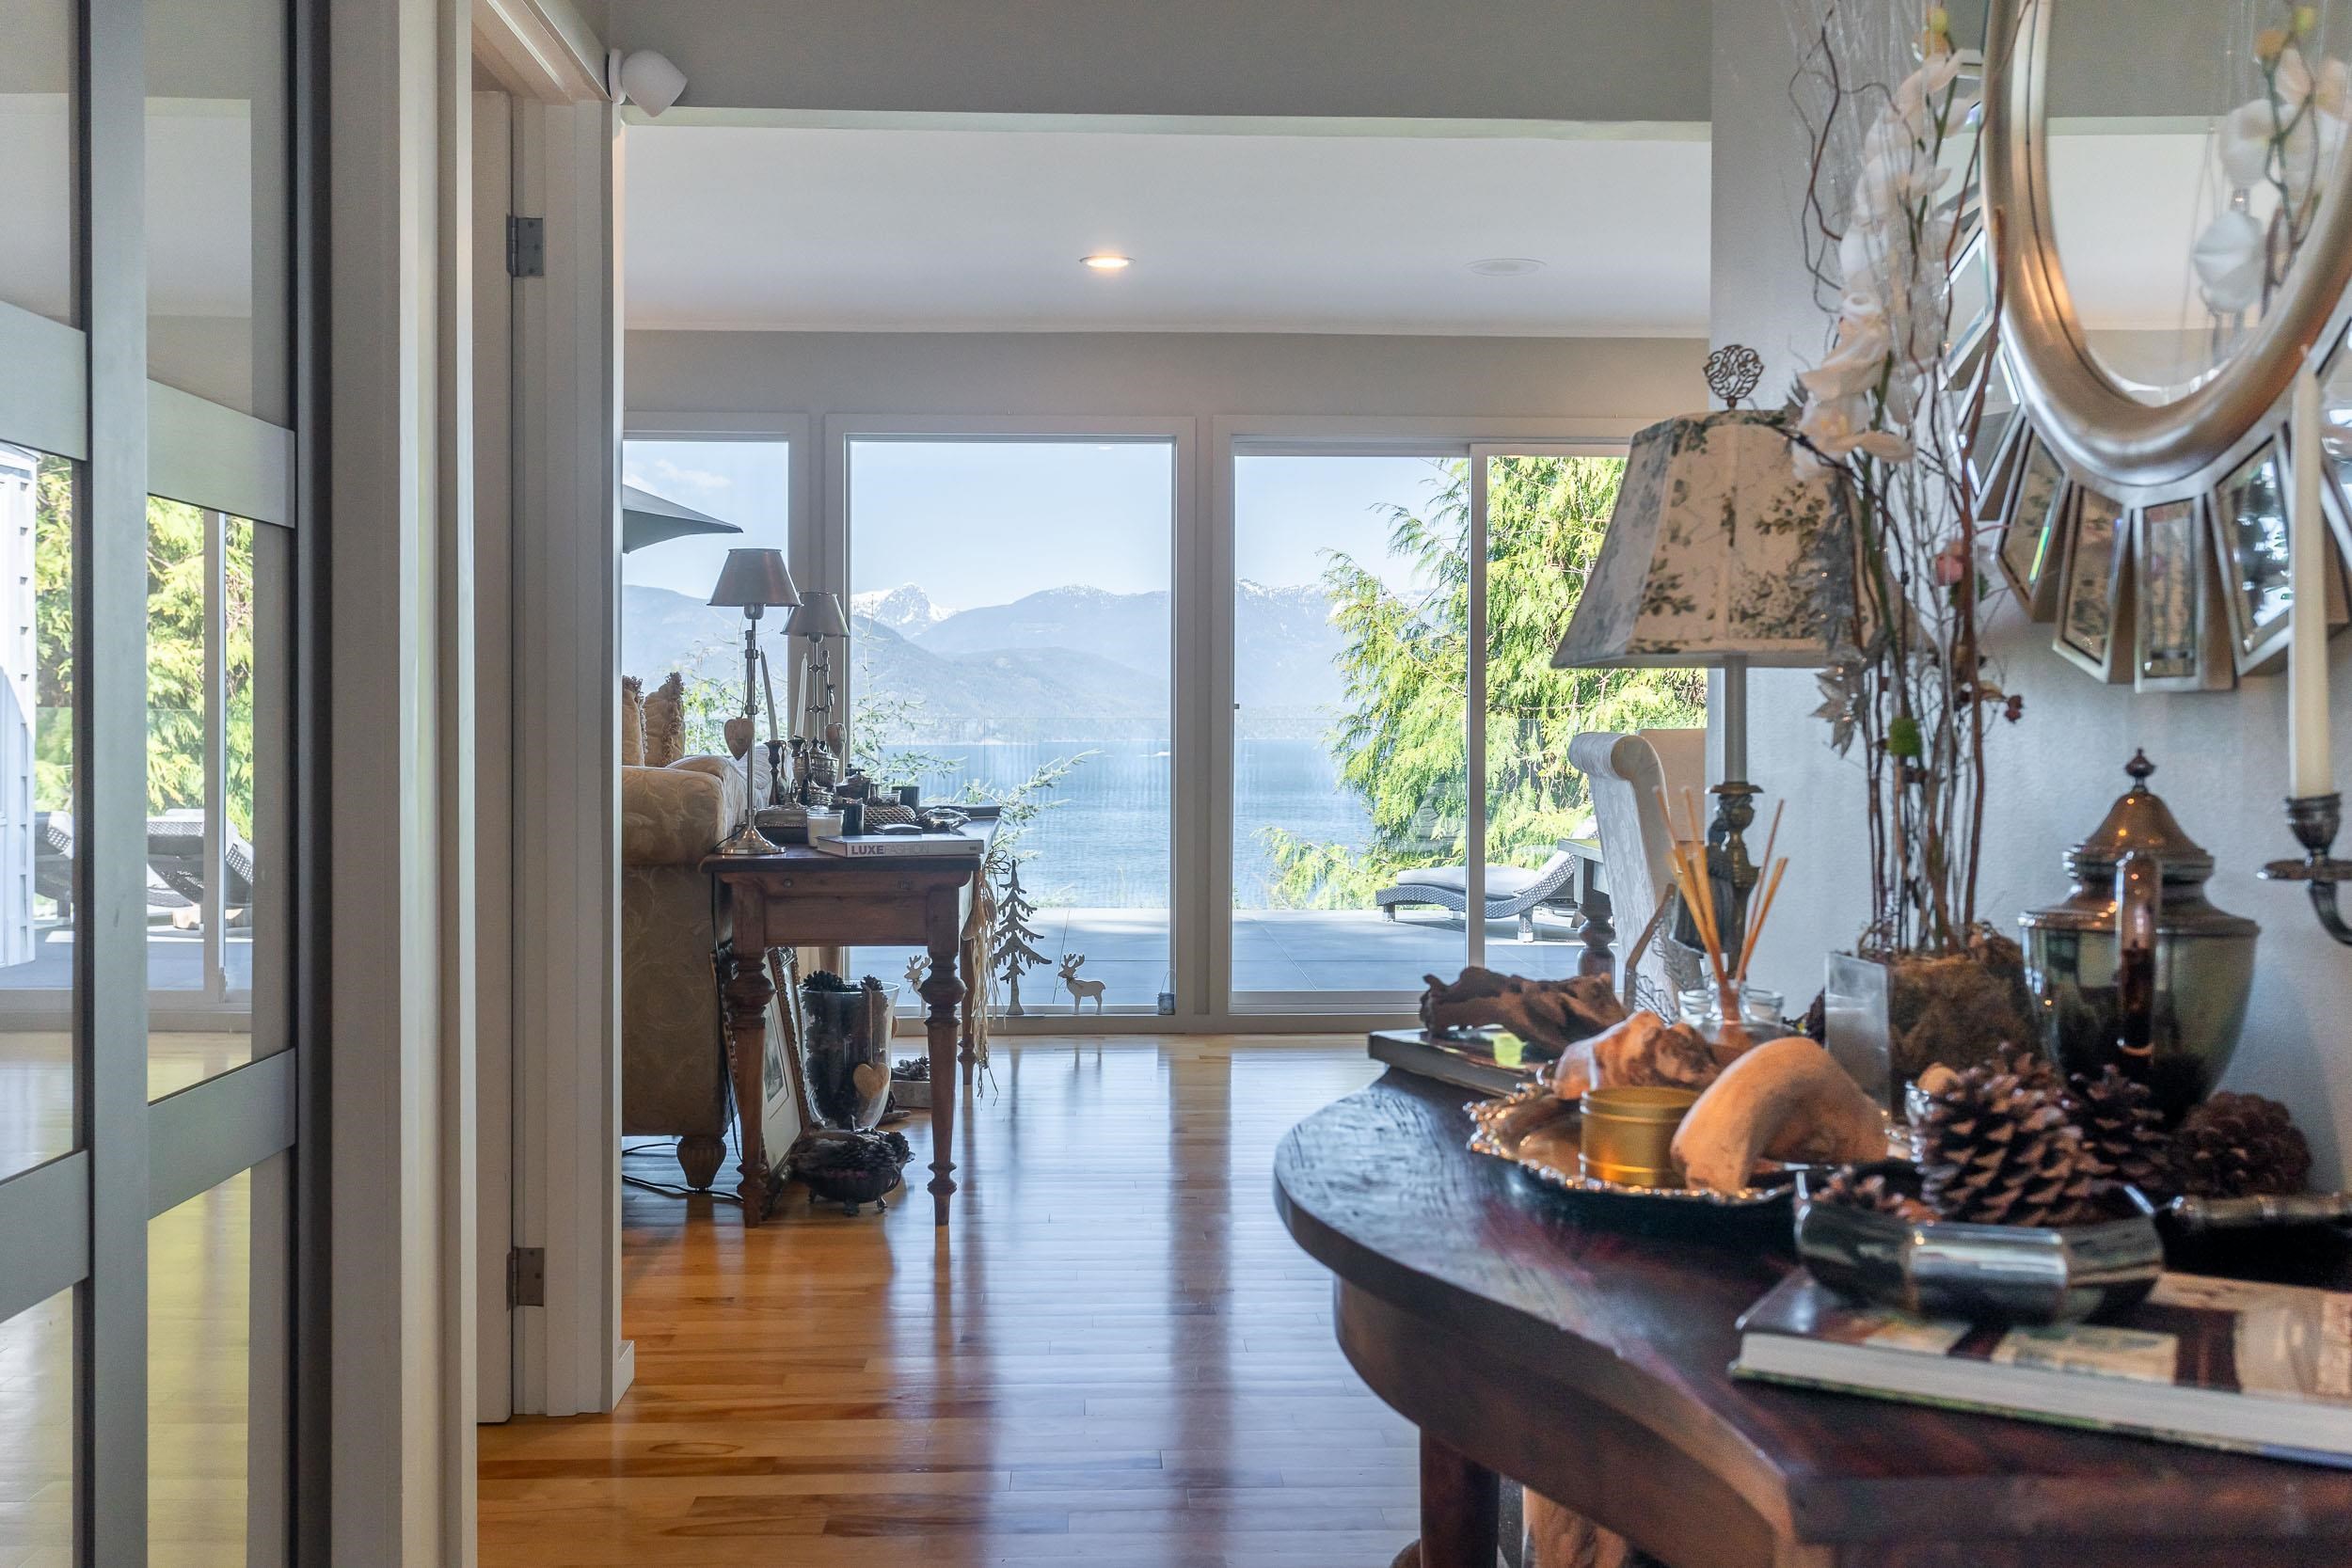 Listing image of 30 OCEANVIEW ROAD